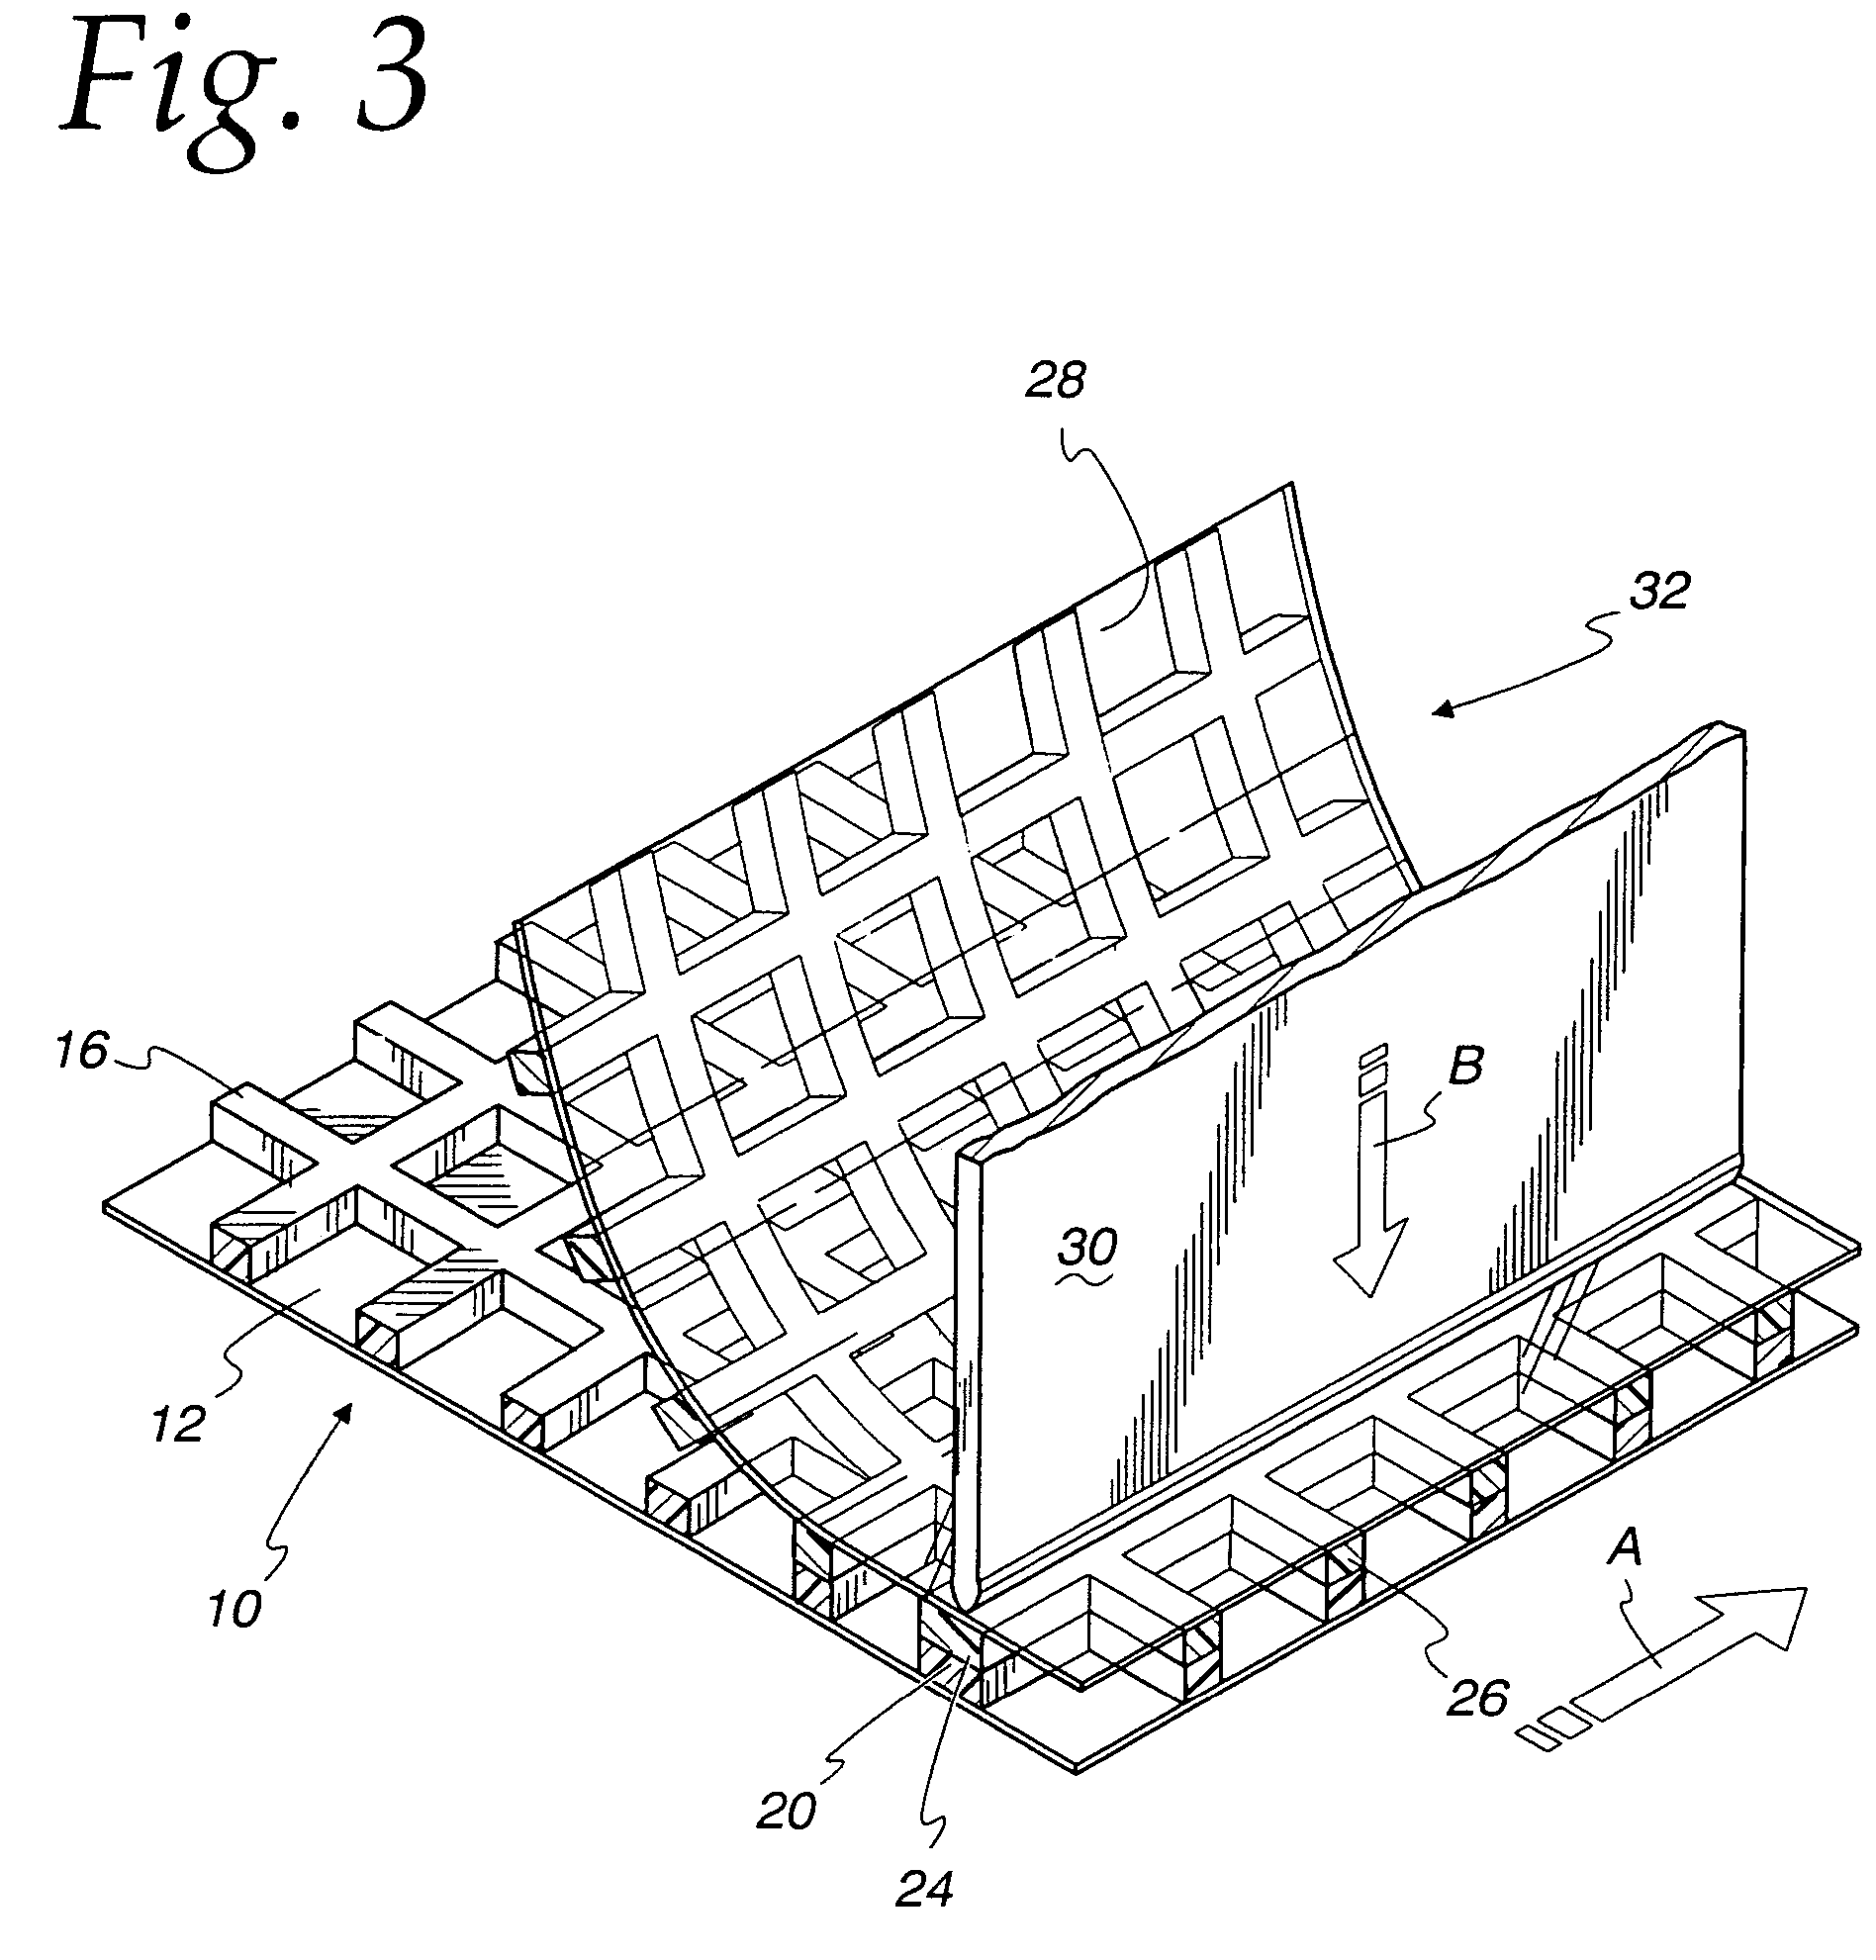 Net-reinforced film structure with modified strand profile